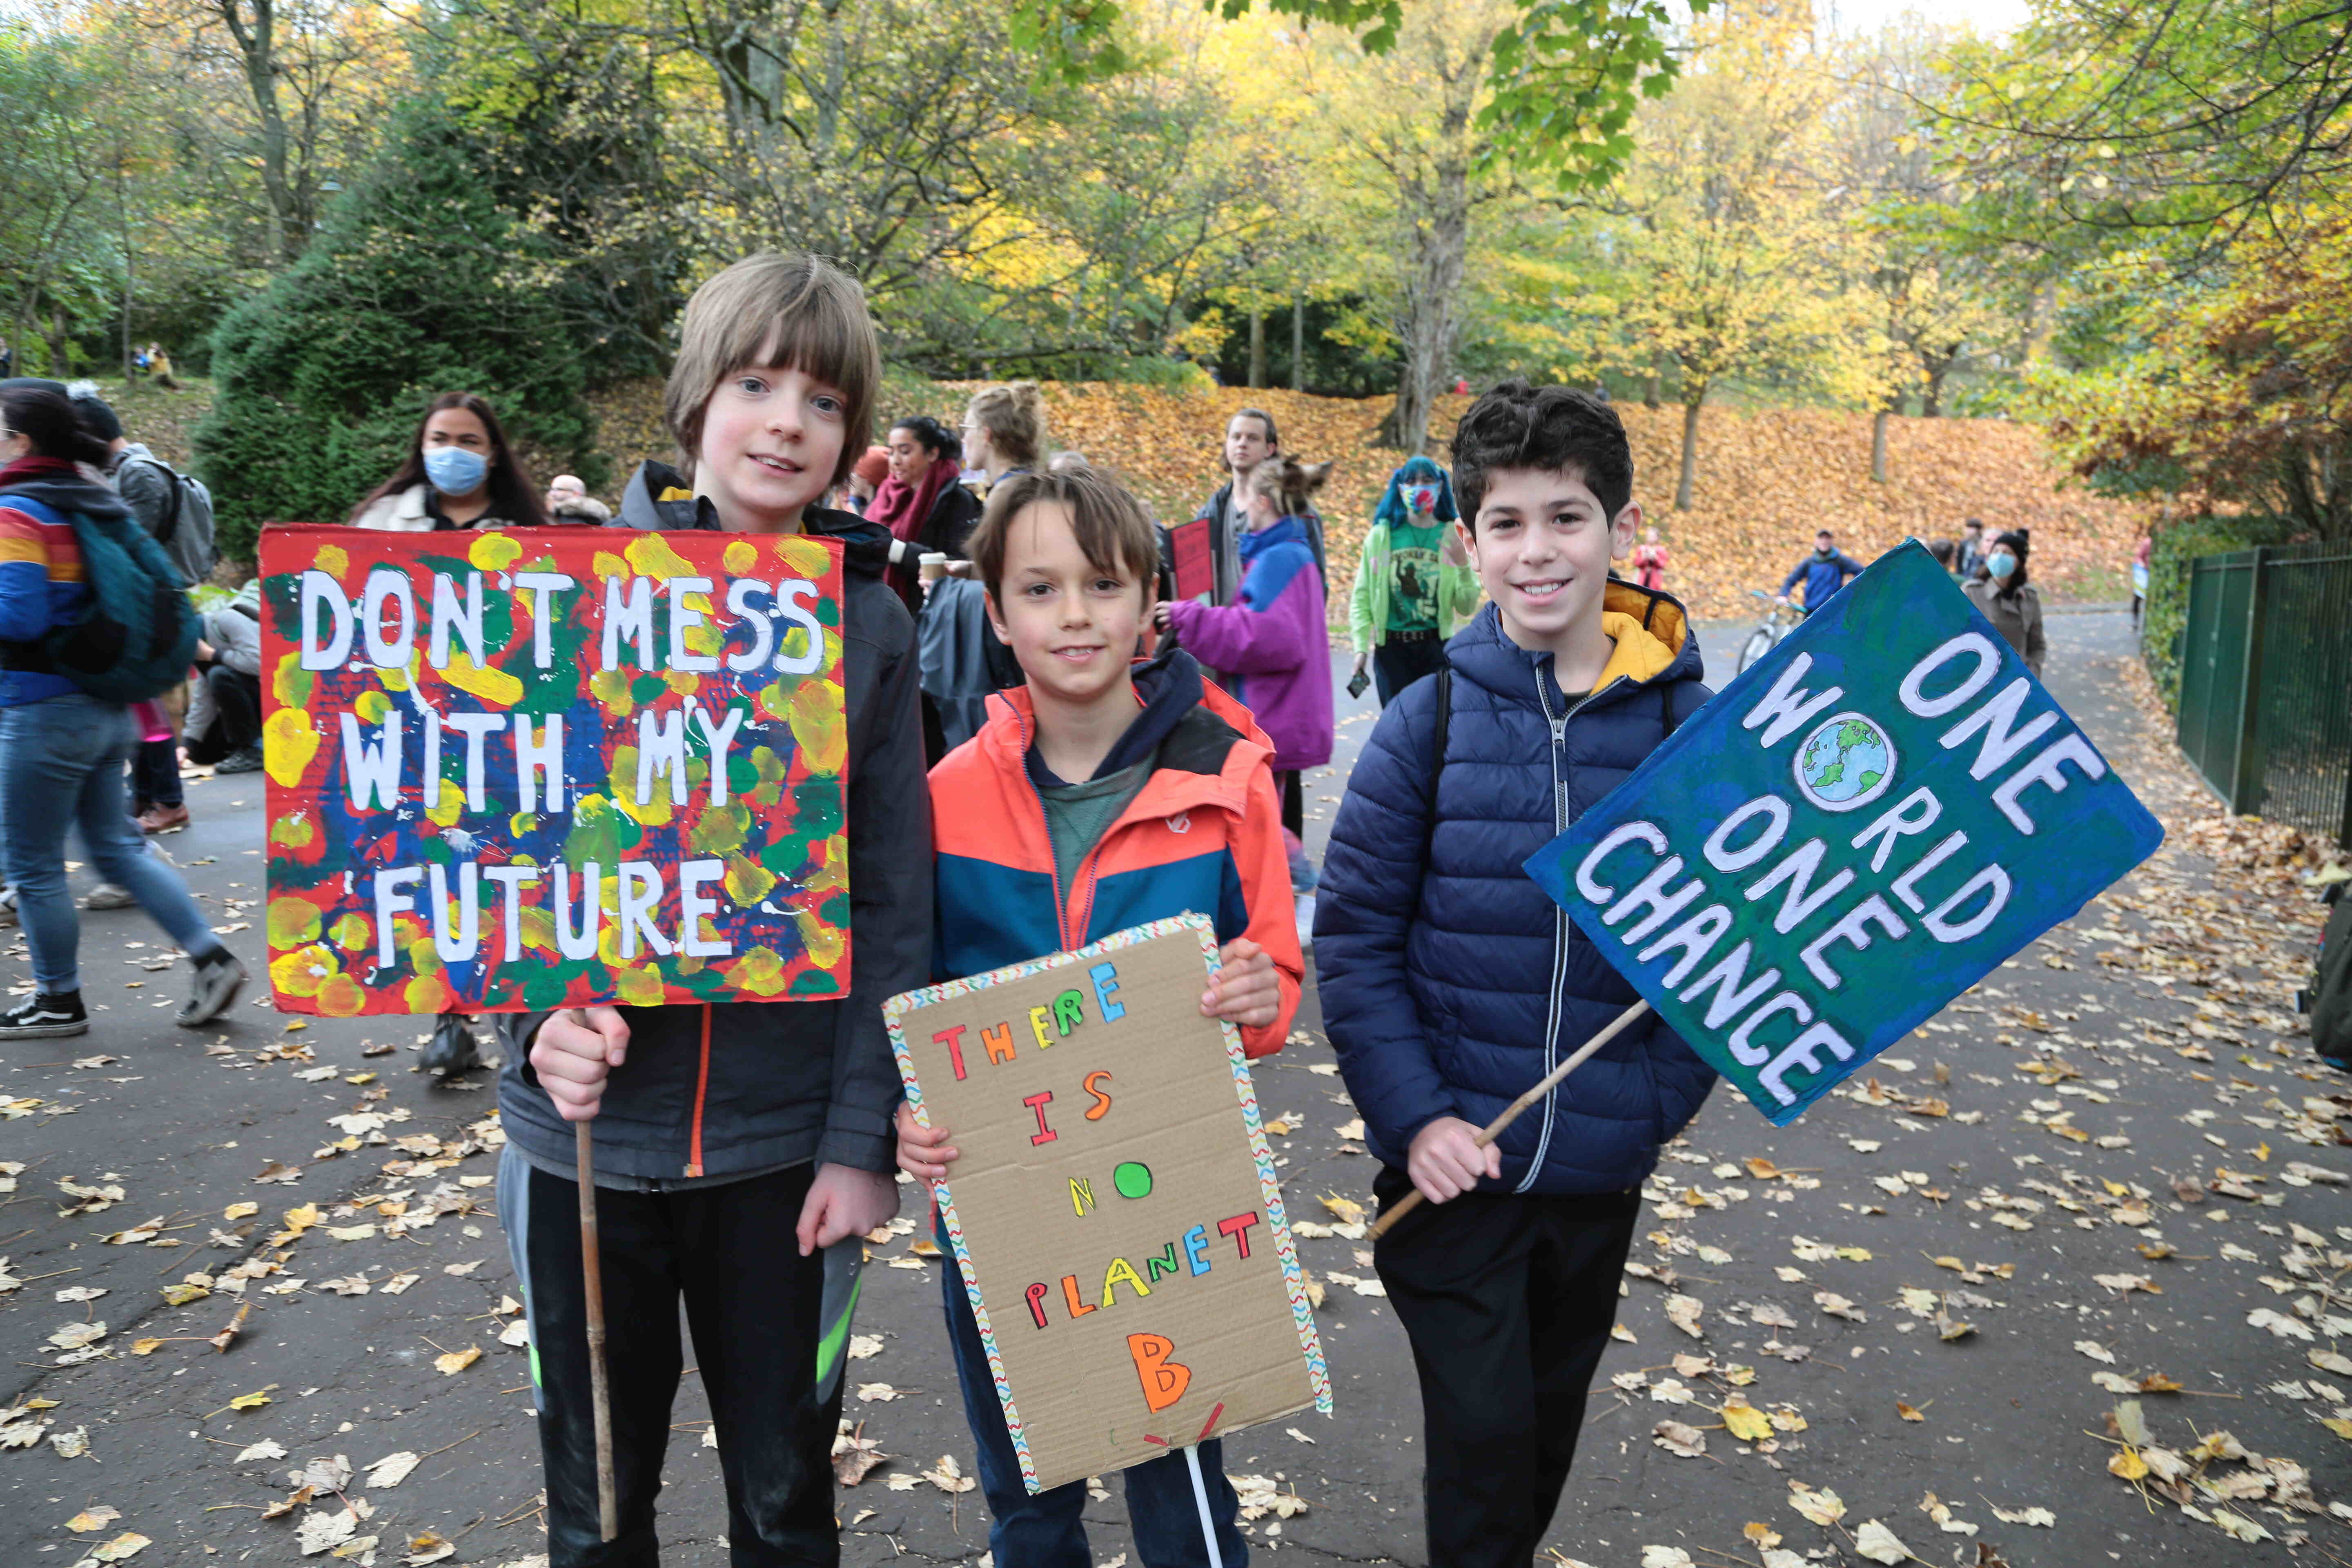 On 5 November 2021 in Glasgow, Scotland, people take part in a Fridays for Future demonstration for climate action, led by youth climate activists and organized on the sidelines of the 2021 UN Climate Change Conference (COP26).